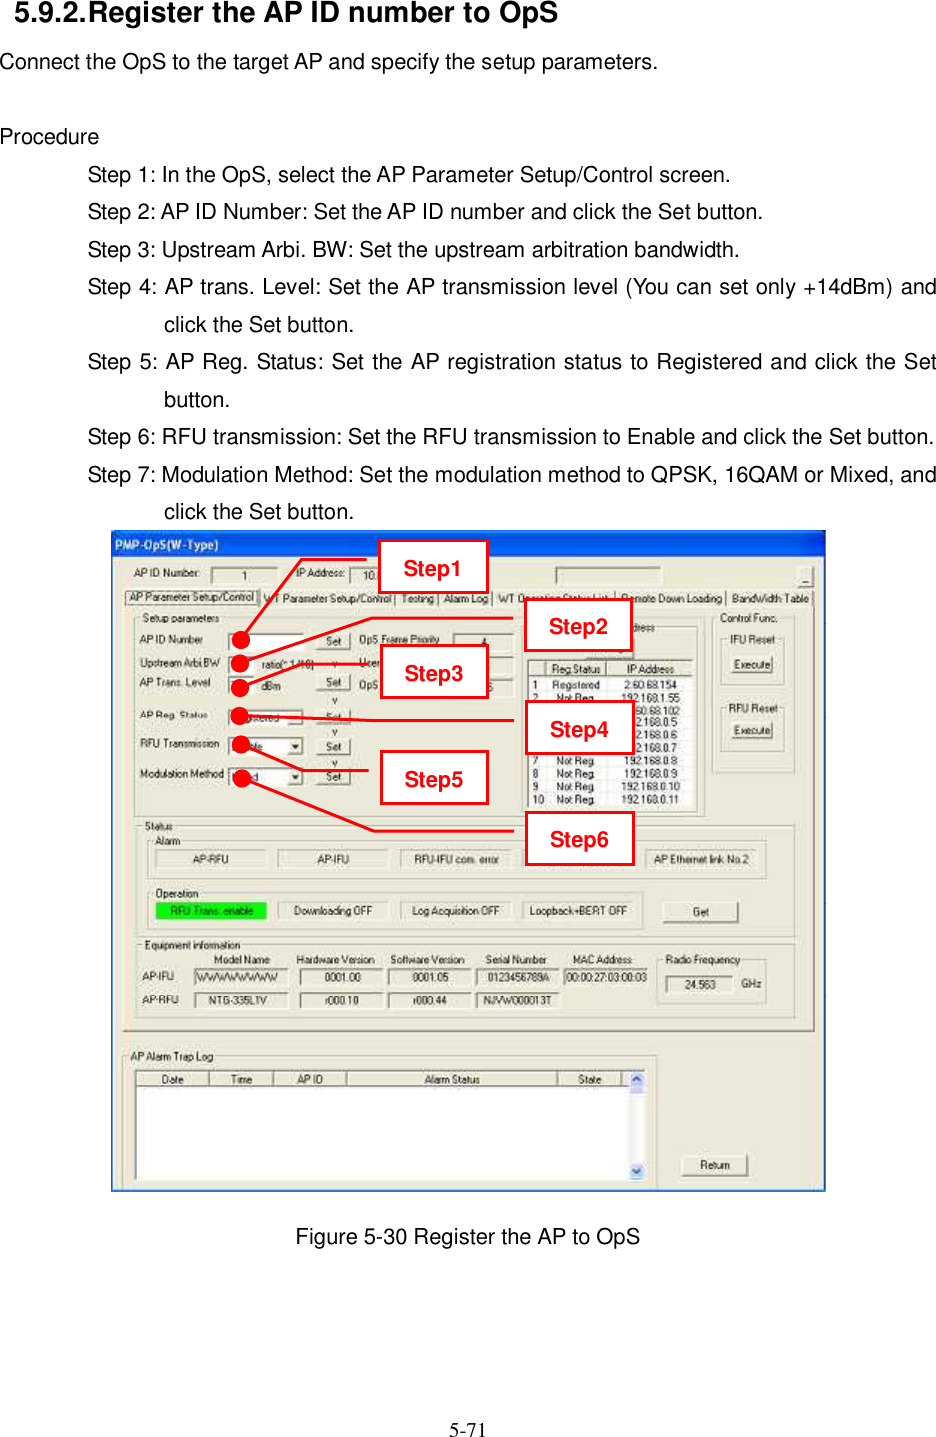   5-71   5.9.2. Register the AP ID number to OpS Connect the OpS to the target AP and specify the setup parameters.  Procedure Step 1: In the OpS, select the AP Parameter Setup/Control screen. Step 2: AP ID Number: Set the AP ID number and click the Set button. Step 3: Upstream Arbi. BW: Set the upstream arbitration bandwidth. Step 4: AP trans. Level: Set the AP transmission level (You can set only +14dBm) and click the Set button. Step 5: AP Reg. Status: Set the AP registration status to Registered and click the Set button. Step 6: RFU transmission: Set the RFU transmission to Enable and click the Set button. Step 7: Modulation Method: Set the modulation method to QPSK, 16QAM or Mixed, and click the Set button.  Figure 5-30 Register the AP to OpS   Step1 Step2 Step3 Step4 Step5 Step6 